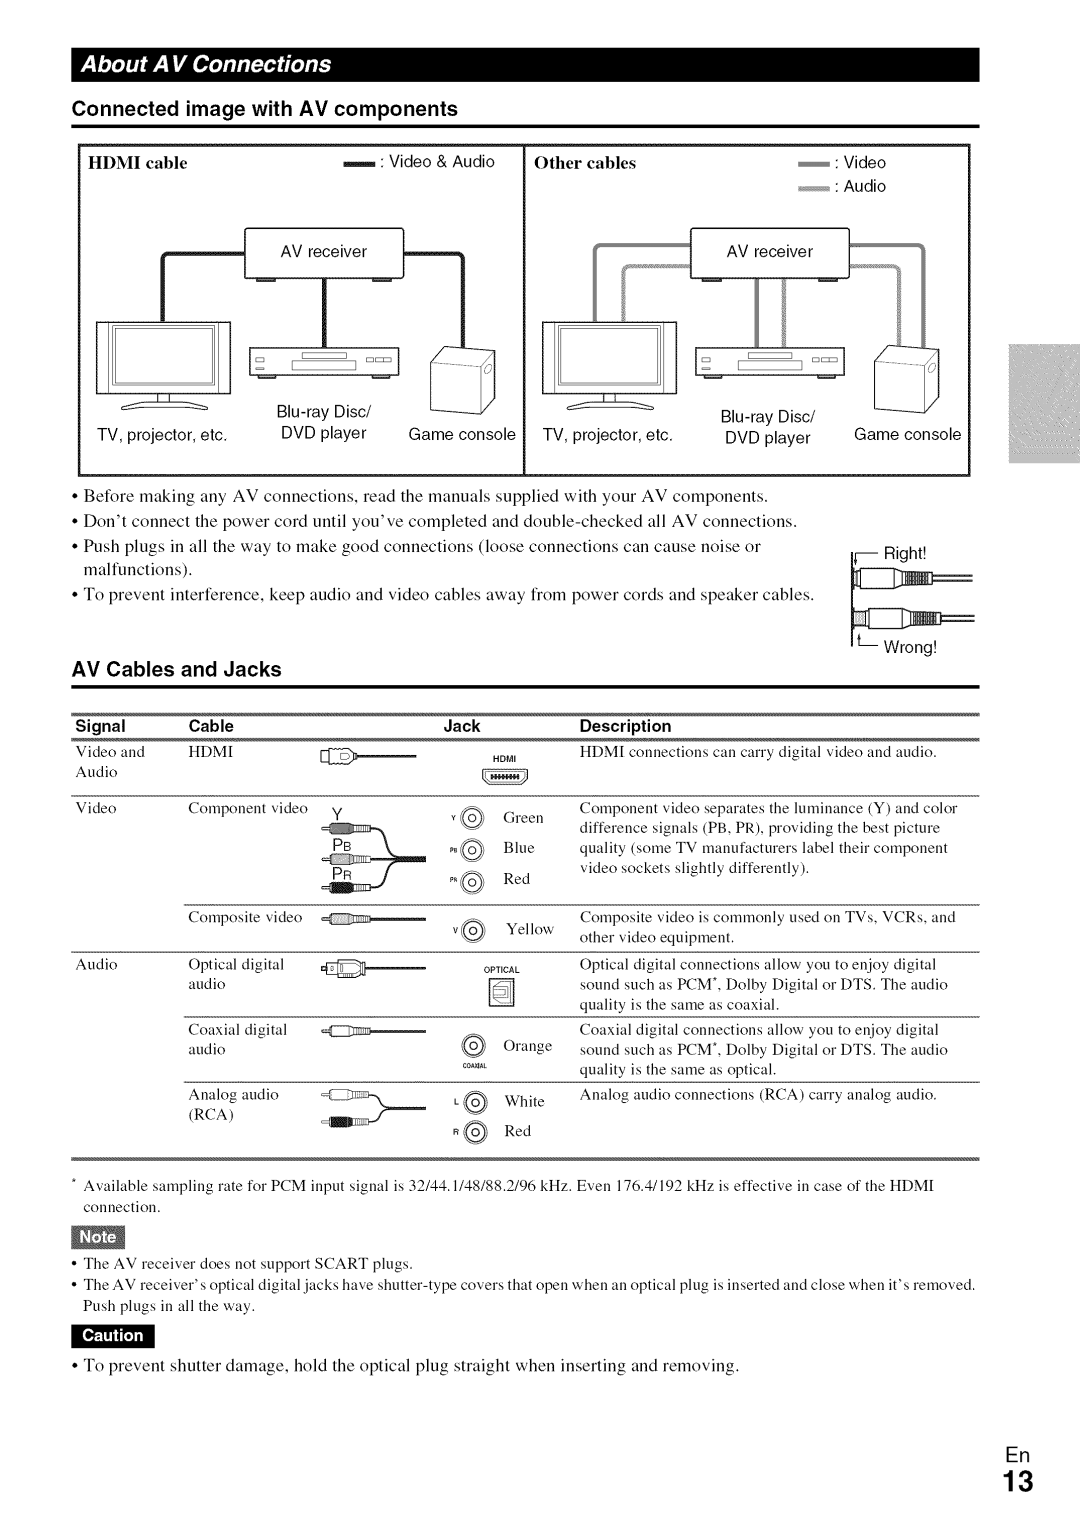 Onkyo HT-R590 instruction manual Connected image with AV components, AV Cables and Jacks, r,_!,l;/lRE !L _/a/;I;Y_;iI_ 